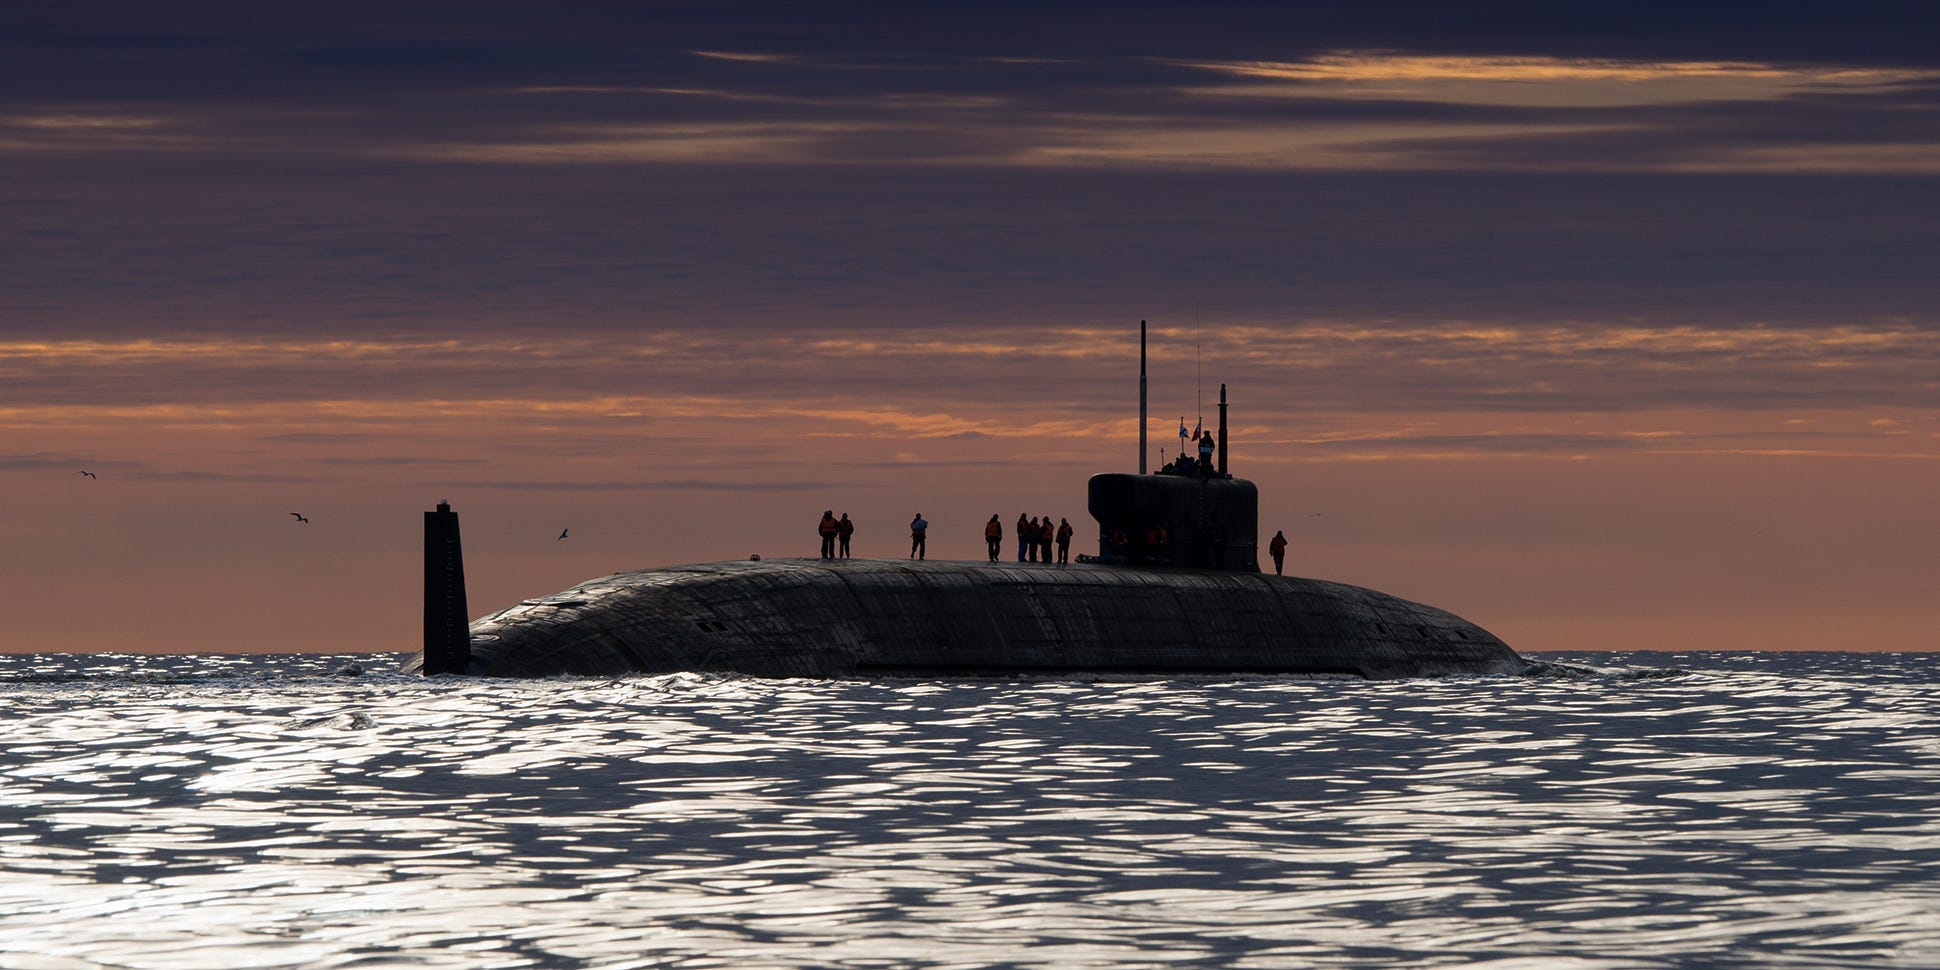 The Project 955A (Borei A) nuclear-powered ballistic missile submarine Knyaz Oleg sets off on its first sea trial in the White Sea.